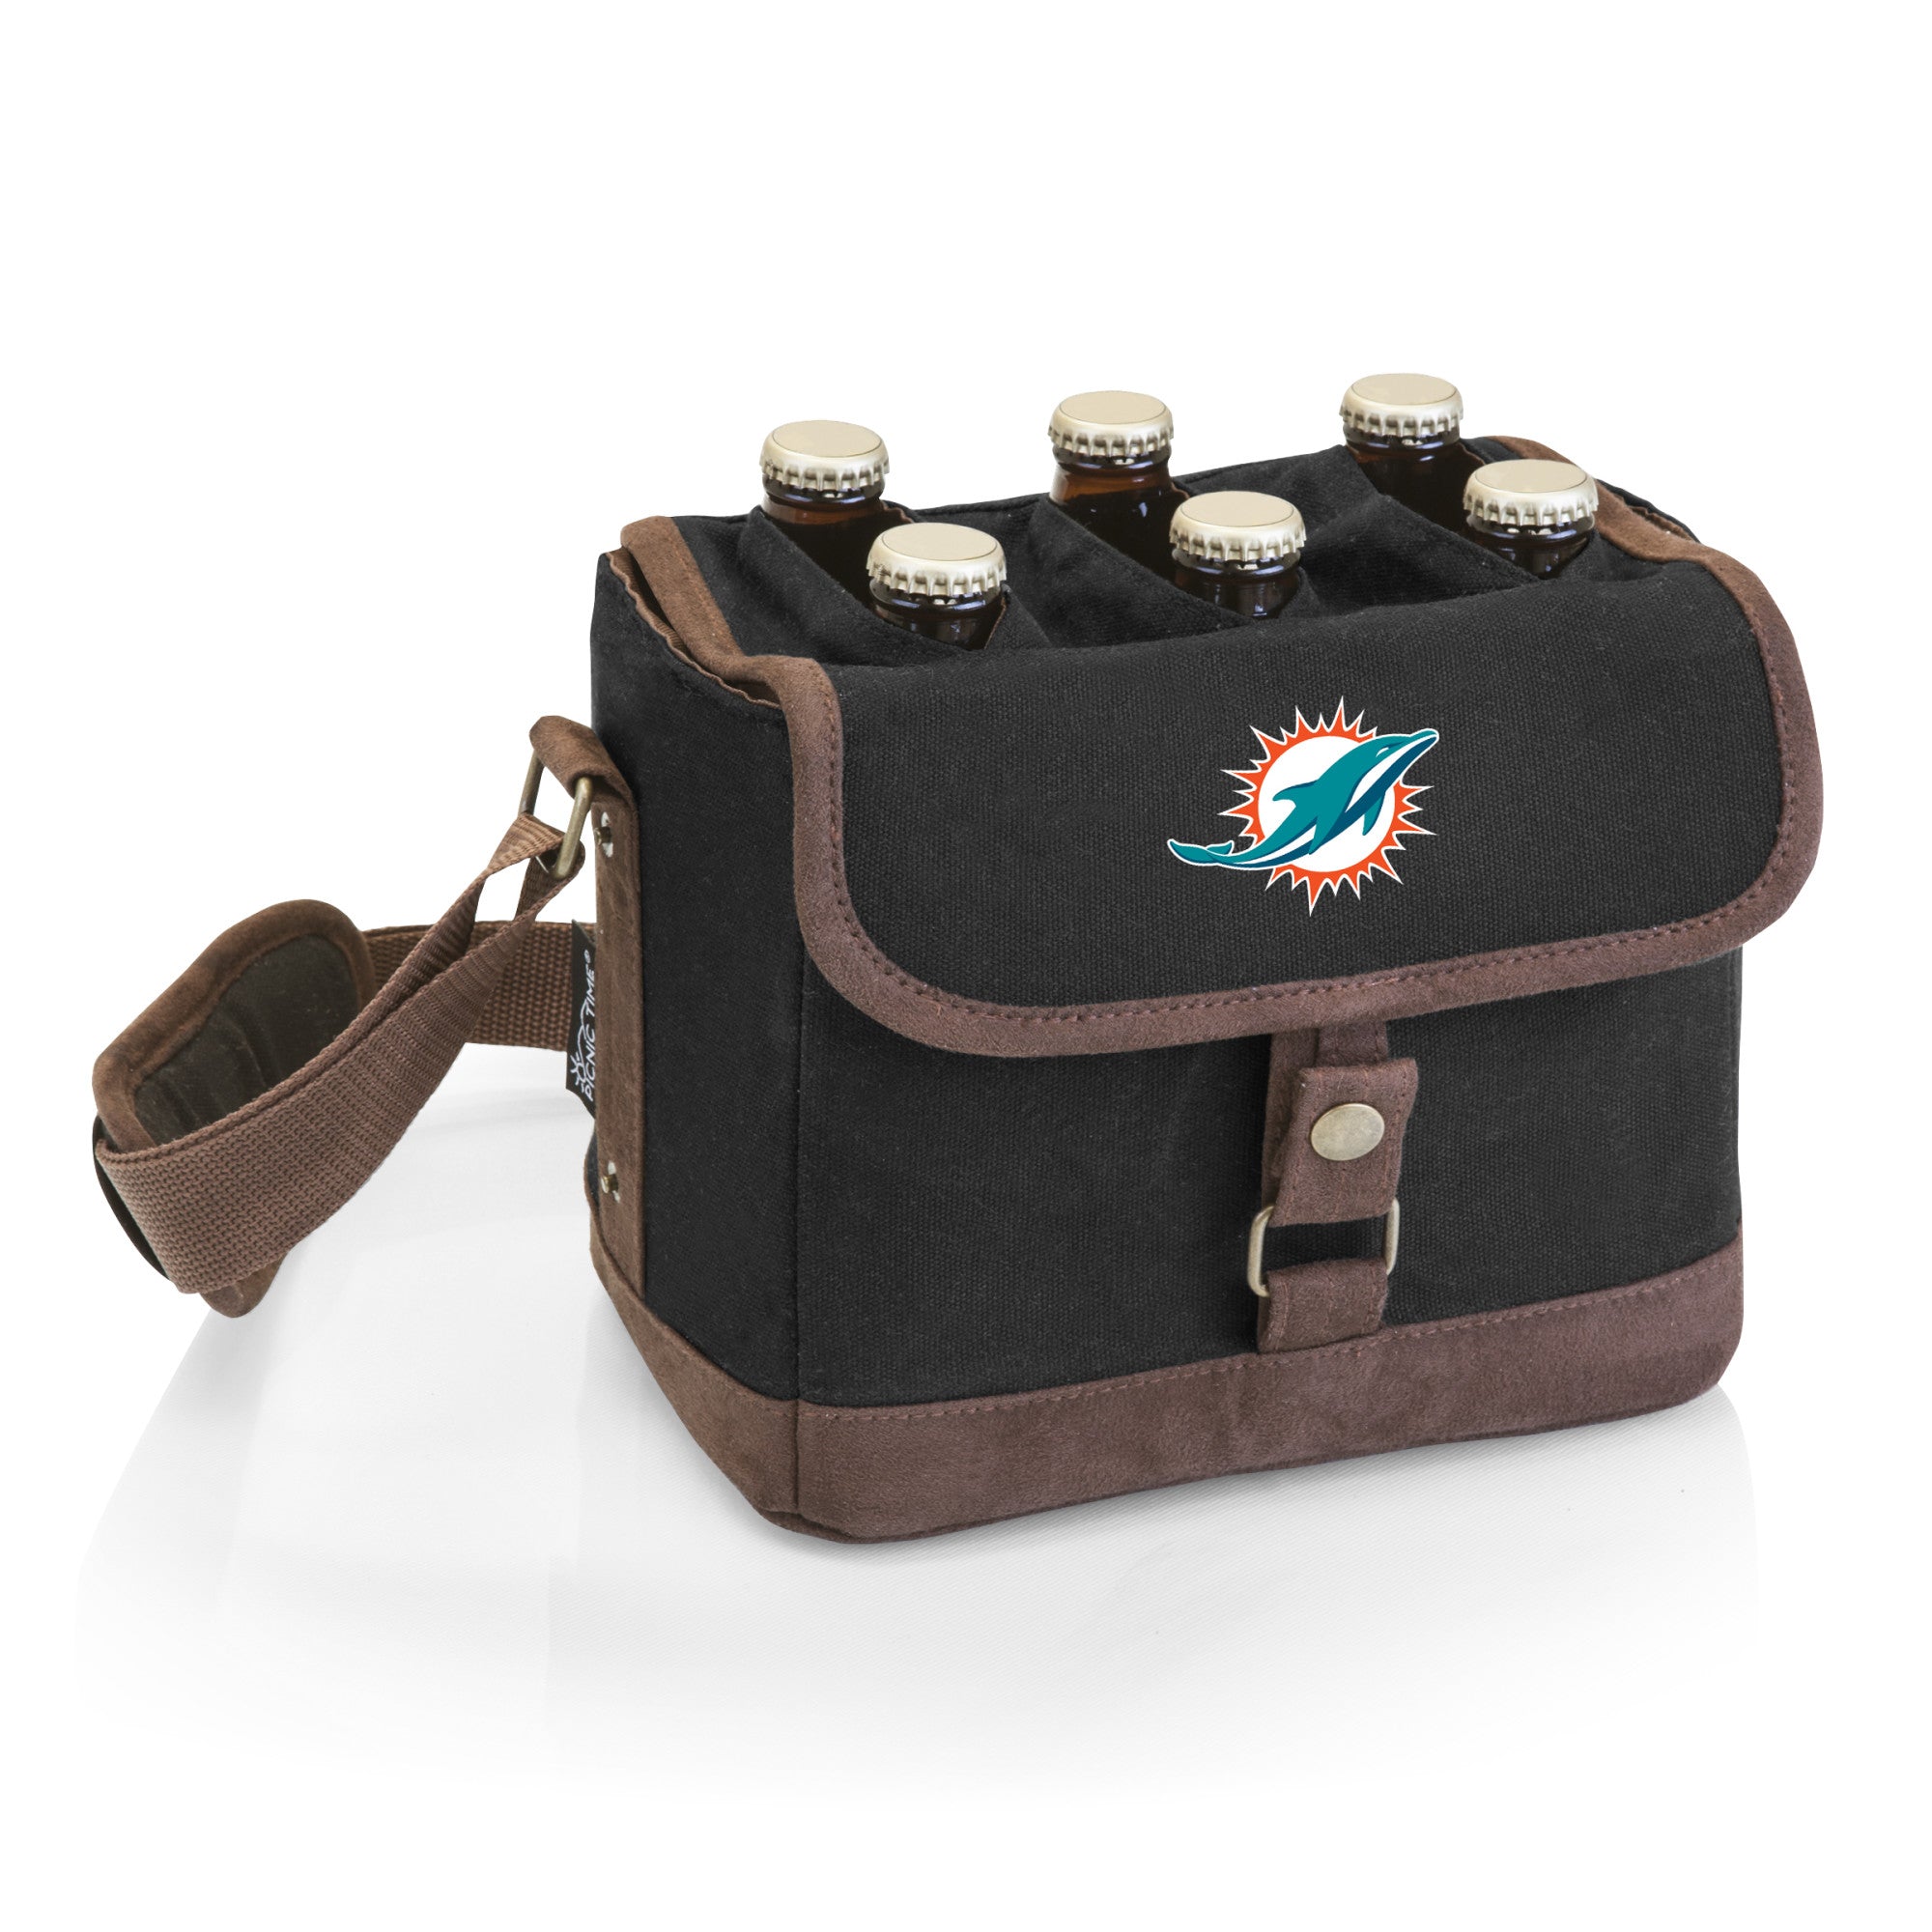 Miami Dolphins - Beer Caddy Cooler Tote with Opener